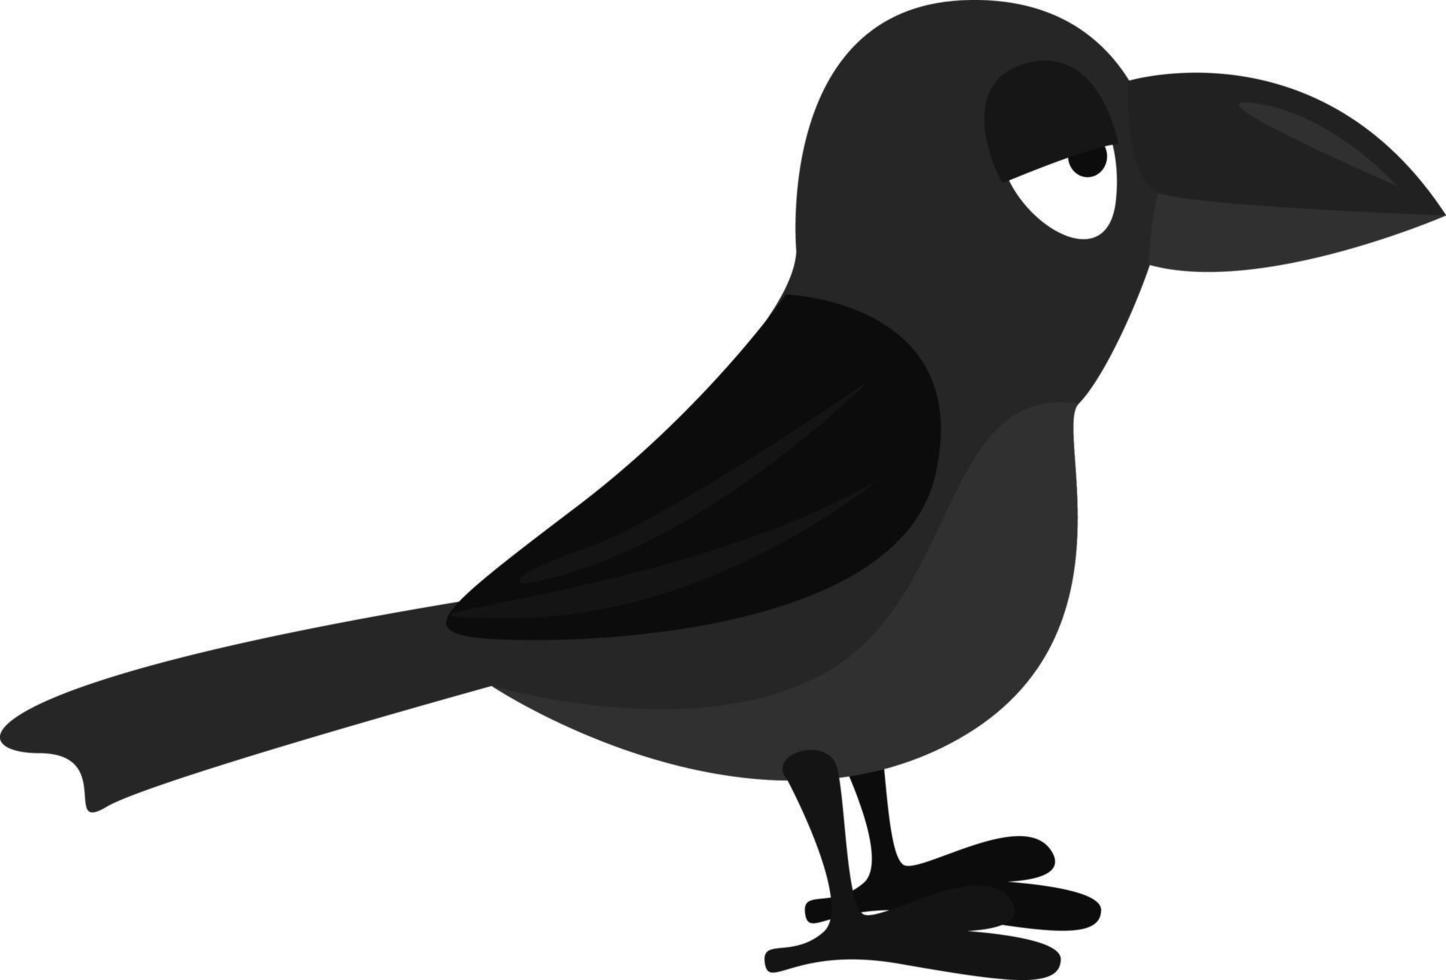 Black crow ,illustration,vector on white background vector